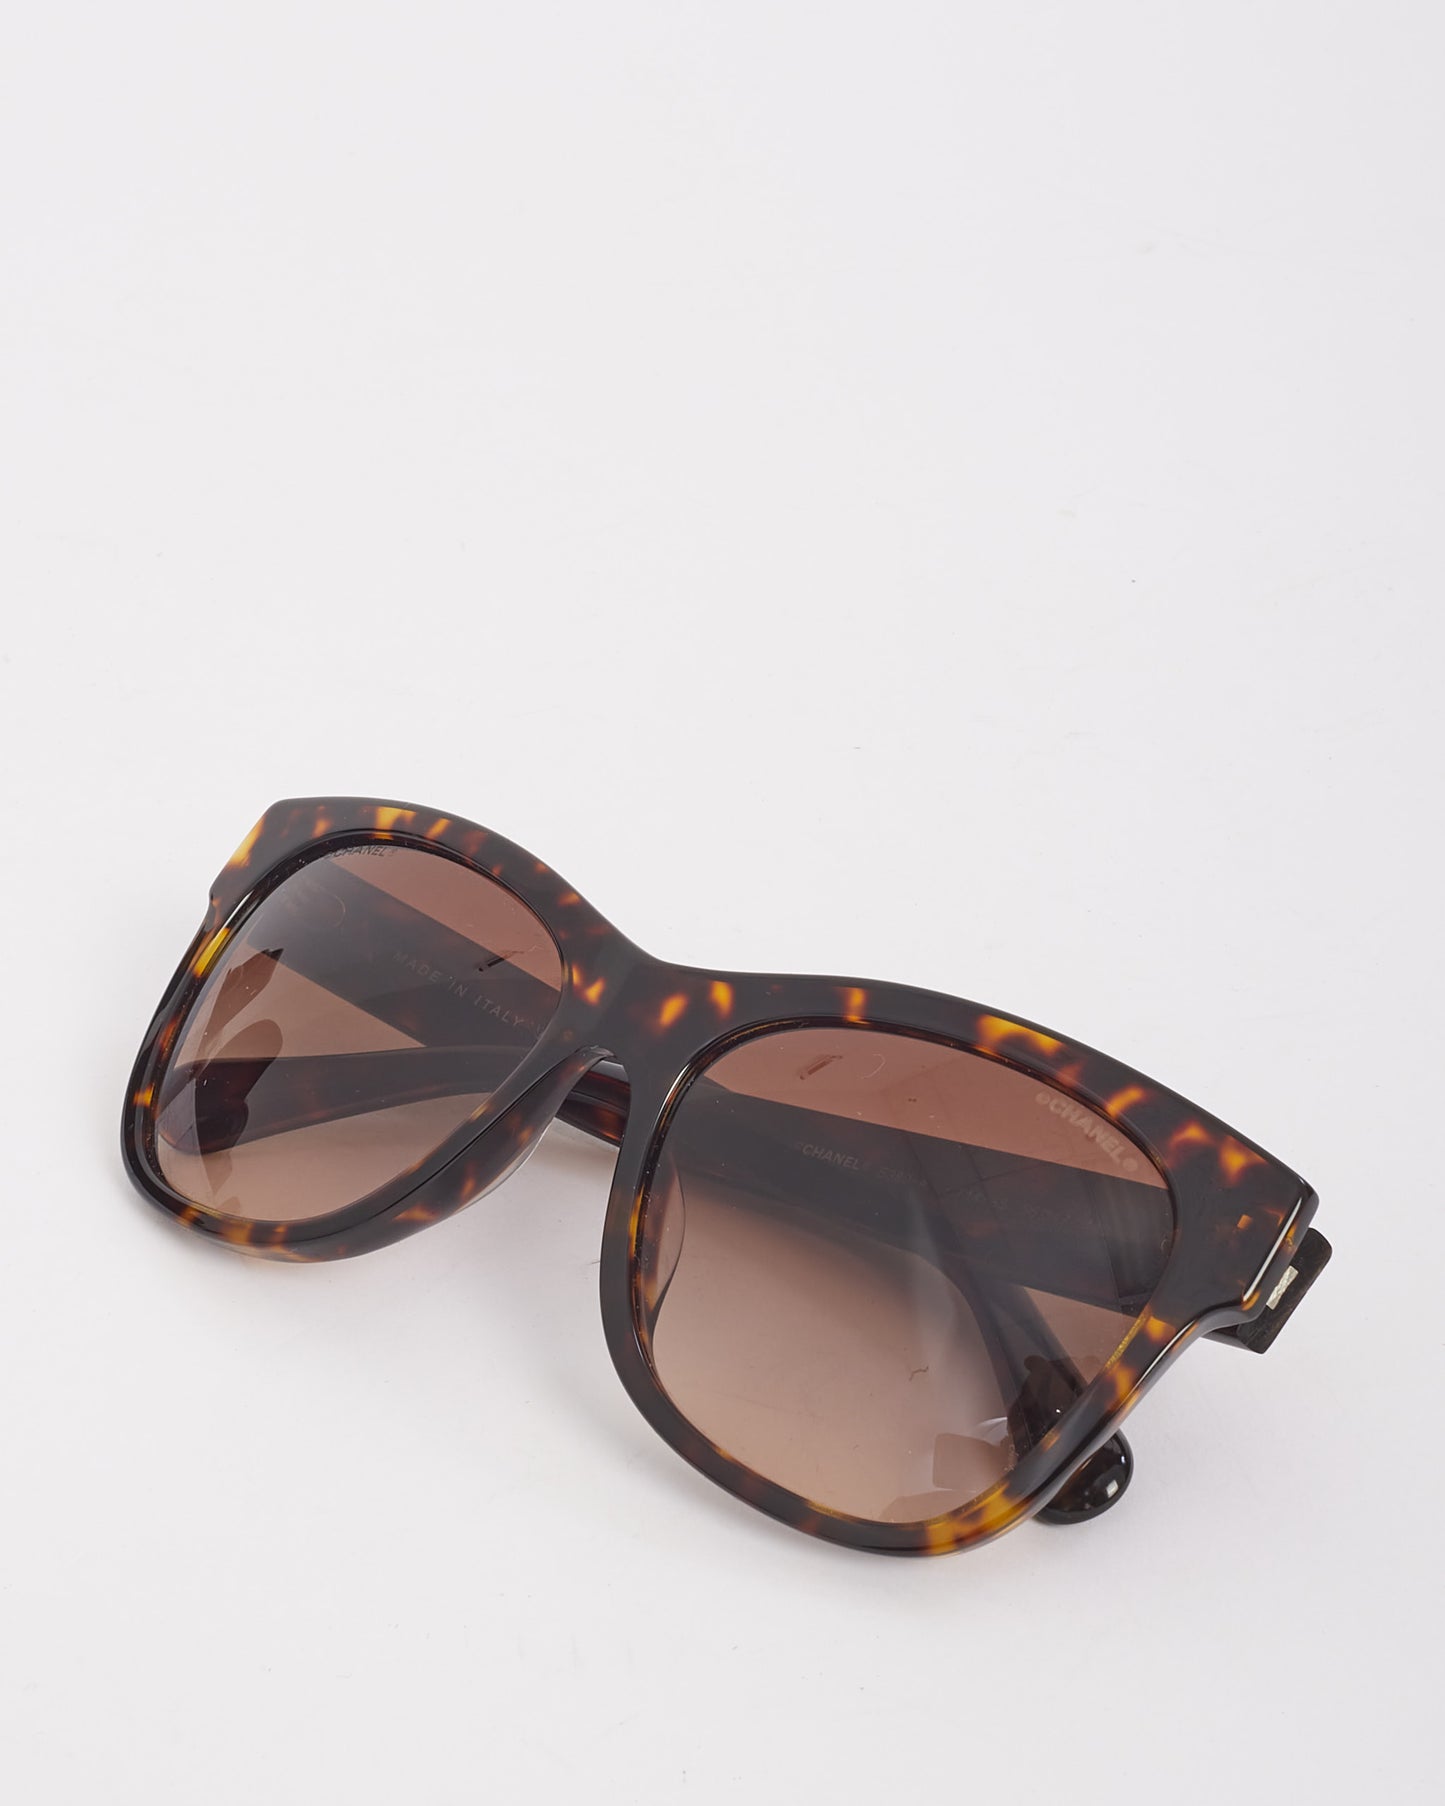 Chanel Brown Tortoise Acetate Butterfly 5380 Sunglasses